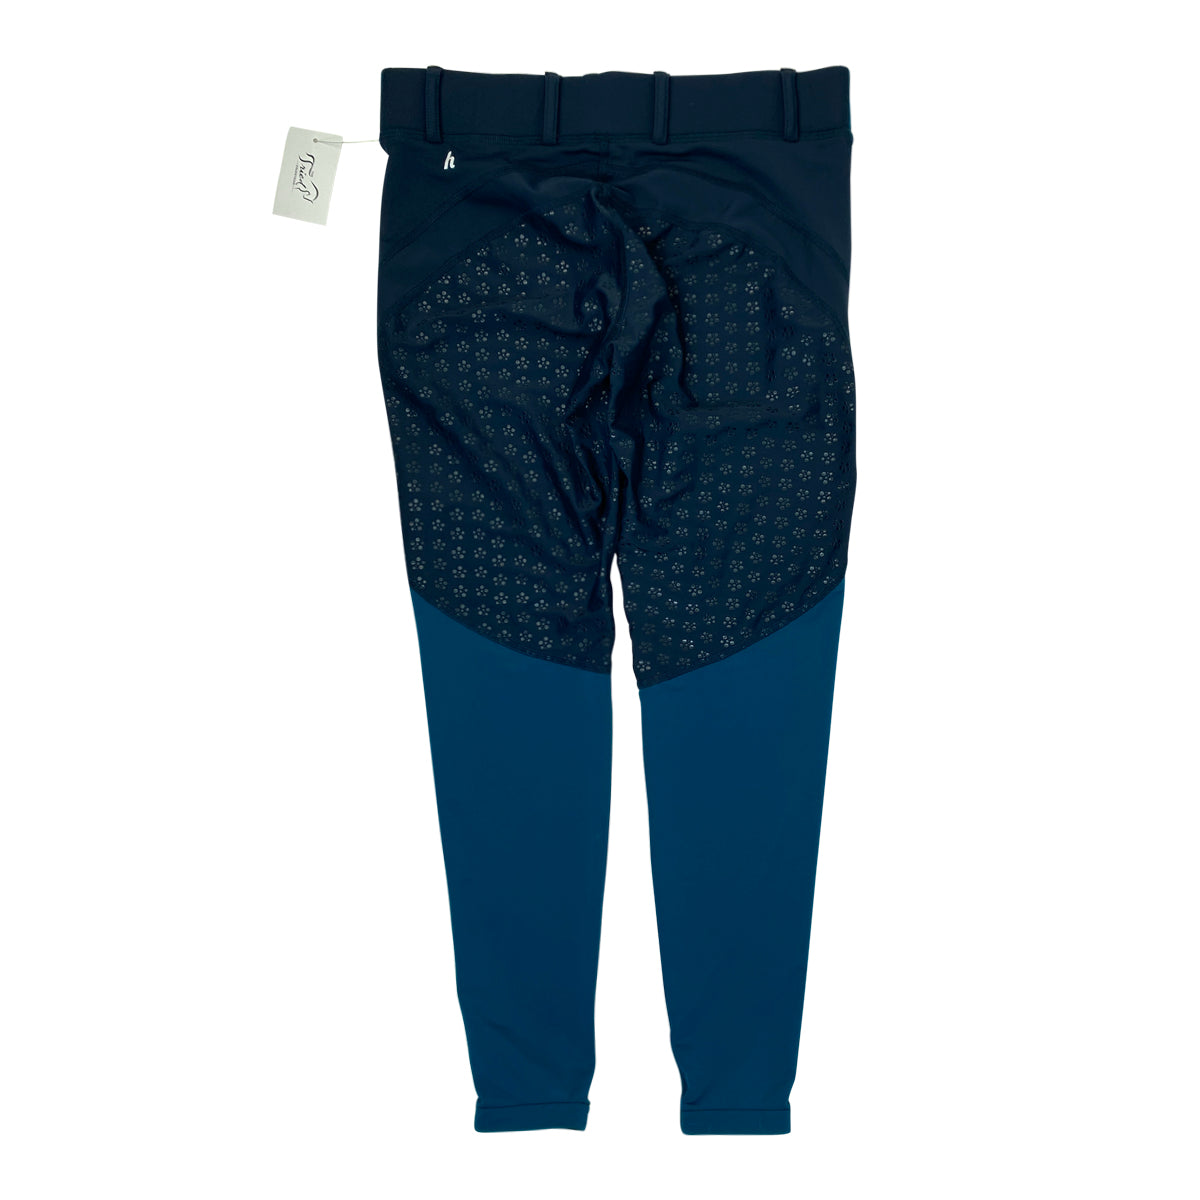 Hippique Full Seat Tights in Pacific Blue